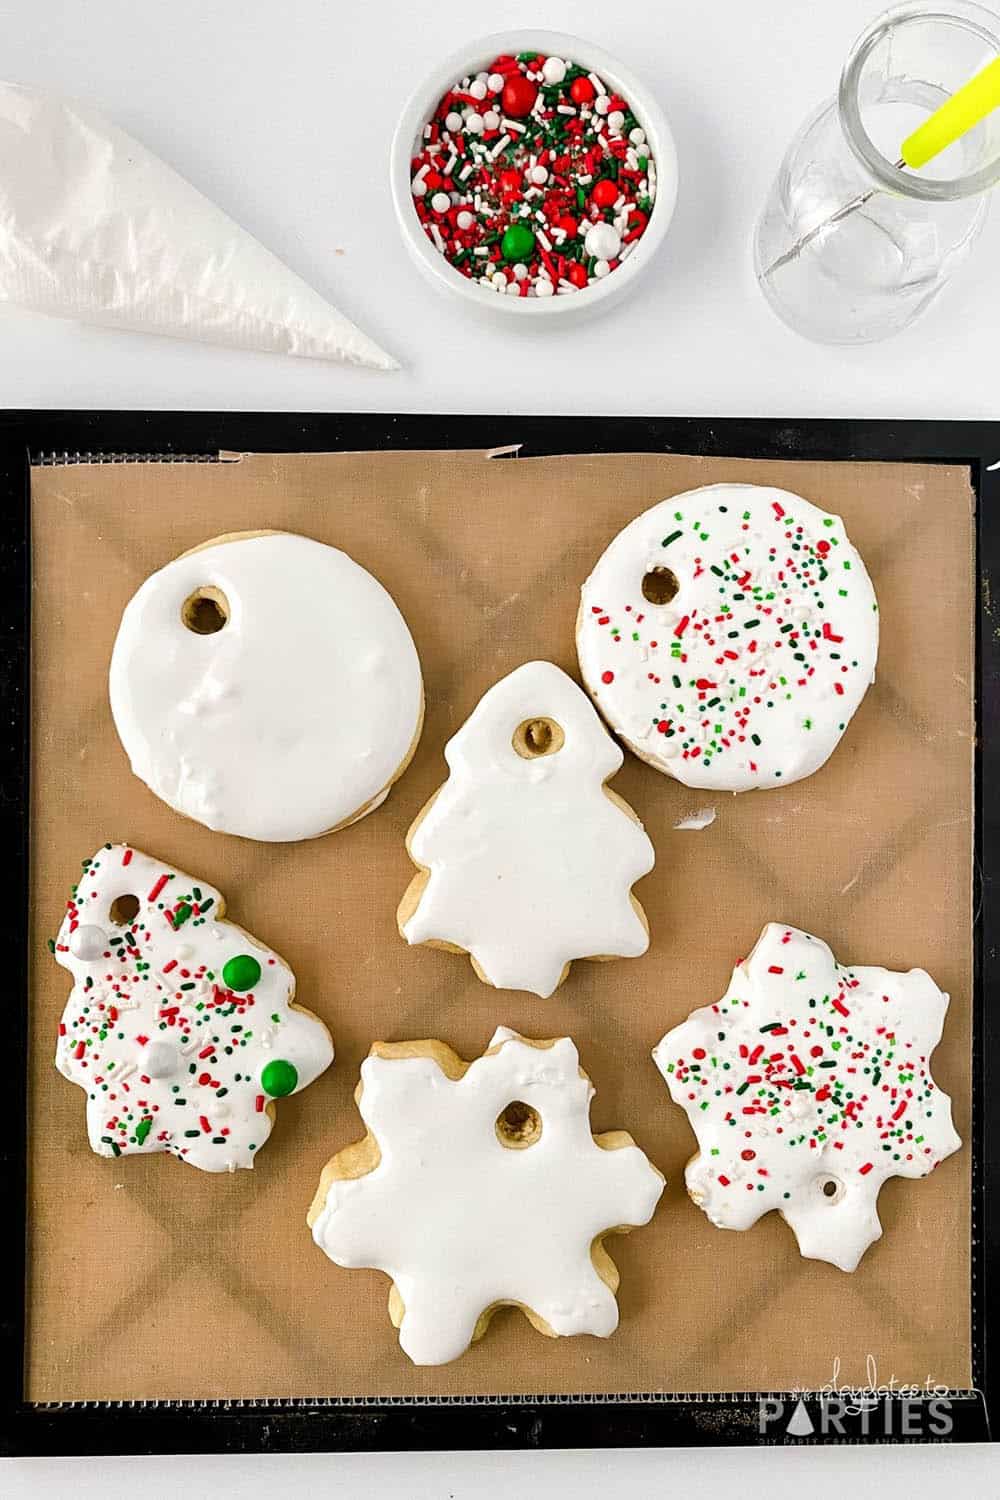 Cookies on a baking mat surrounded by sprinkles and a piping bag.